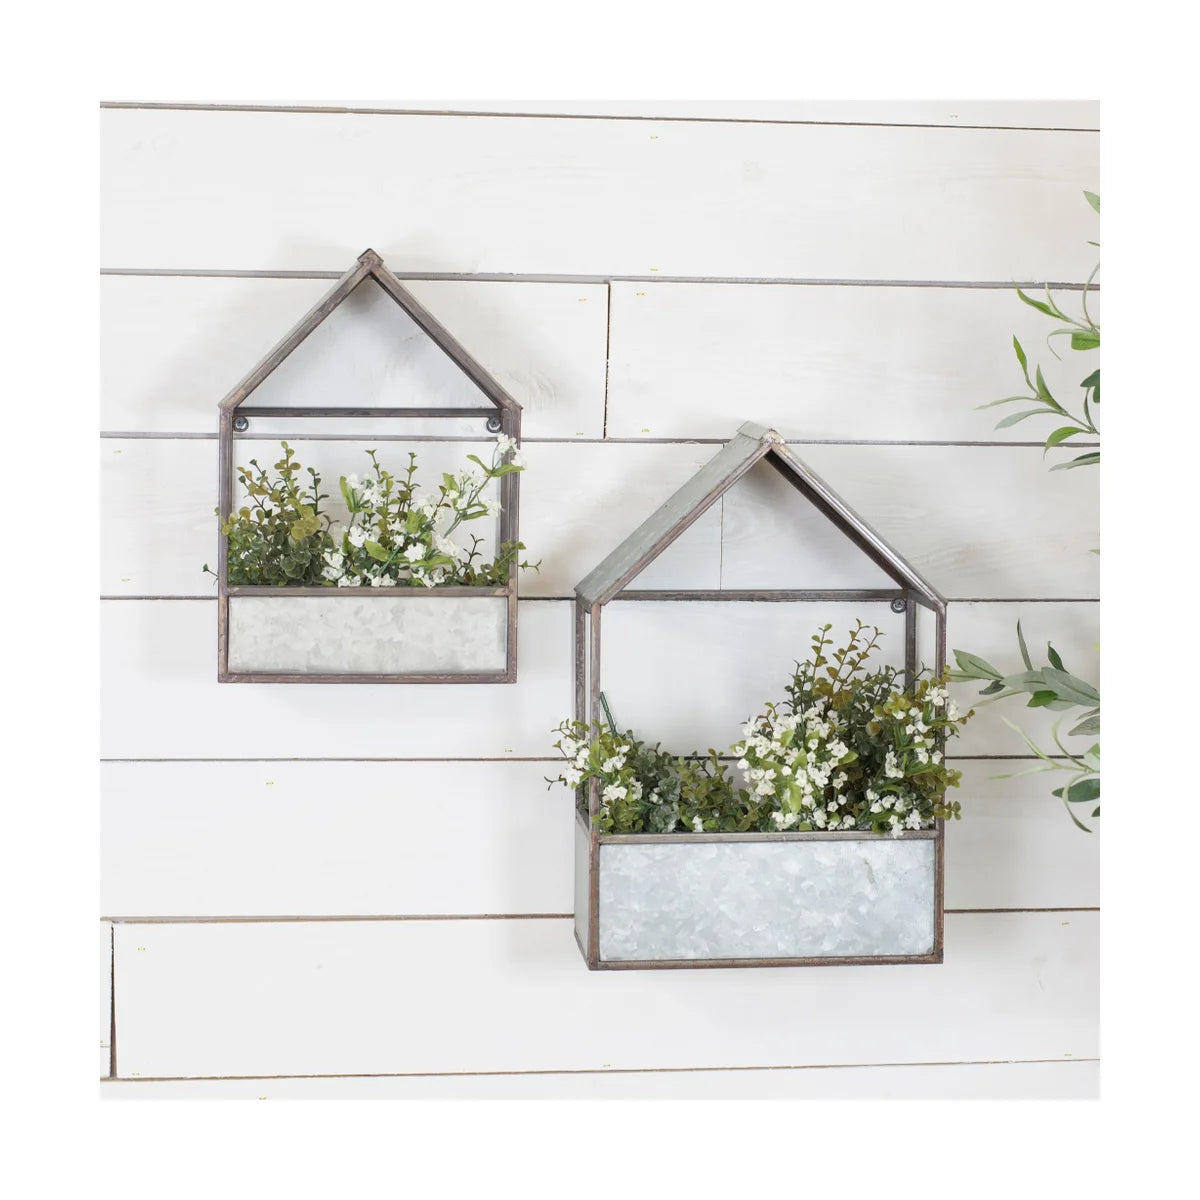 House Wall Planter, The Feathered Farmhouse